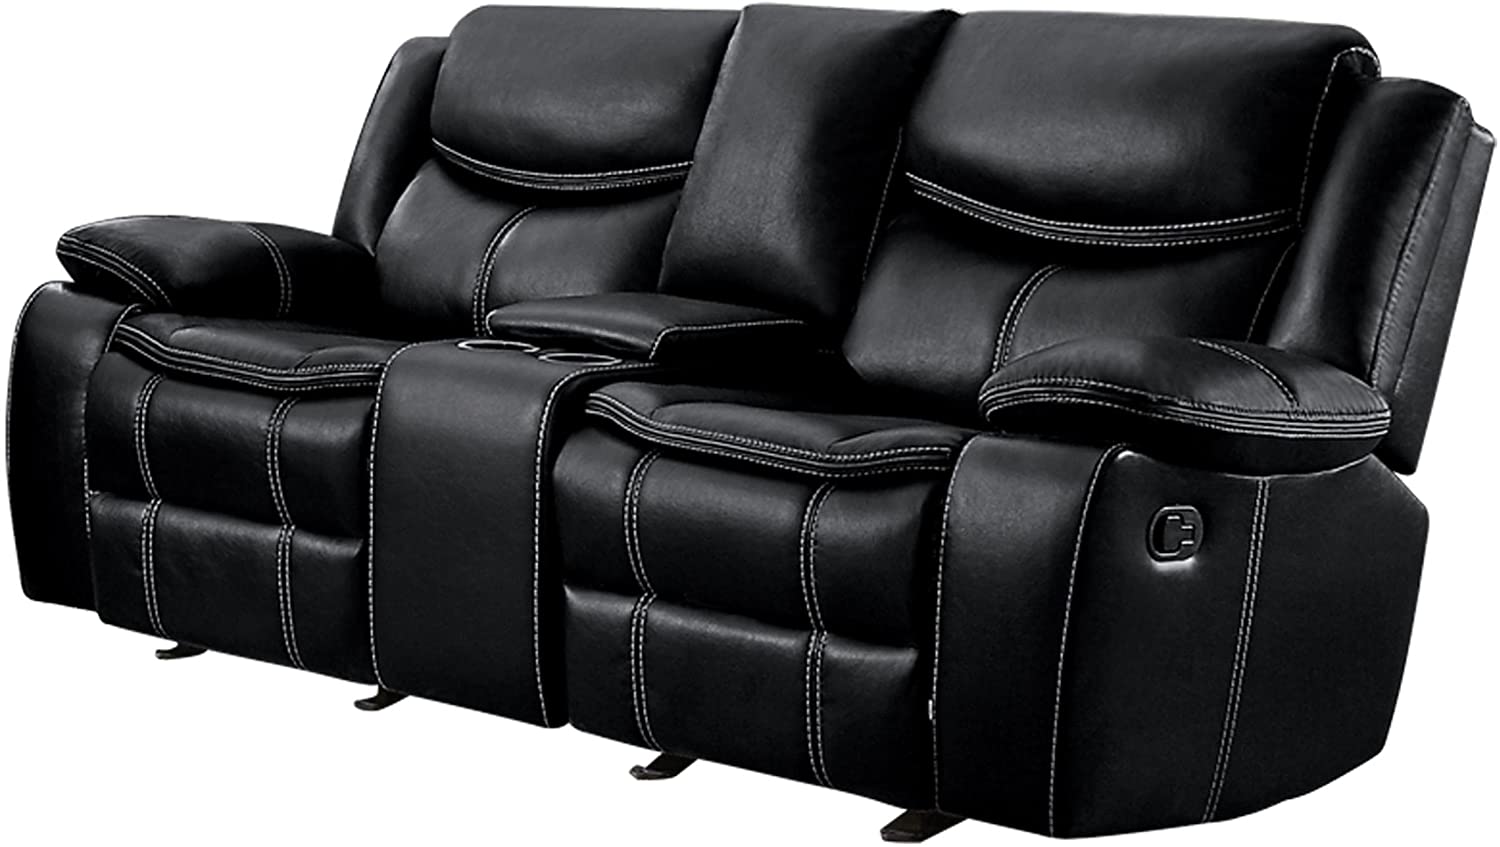 leather sectional sofa with cup holders